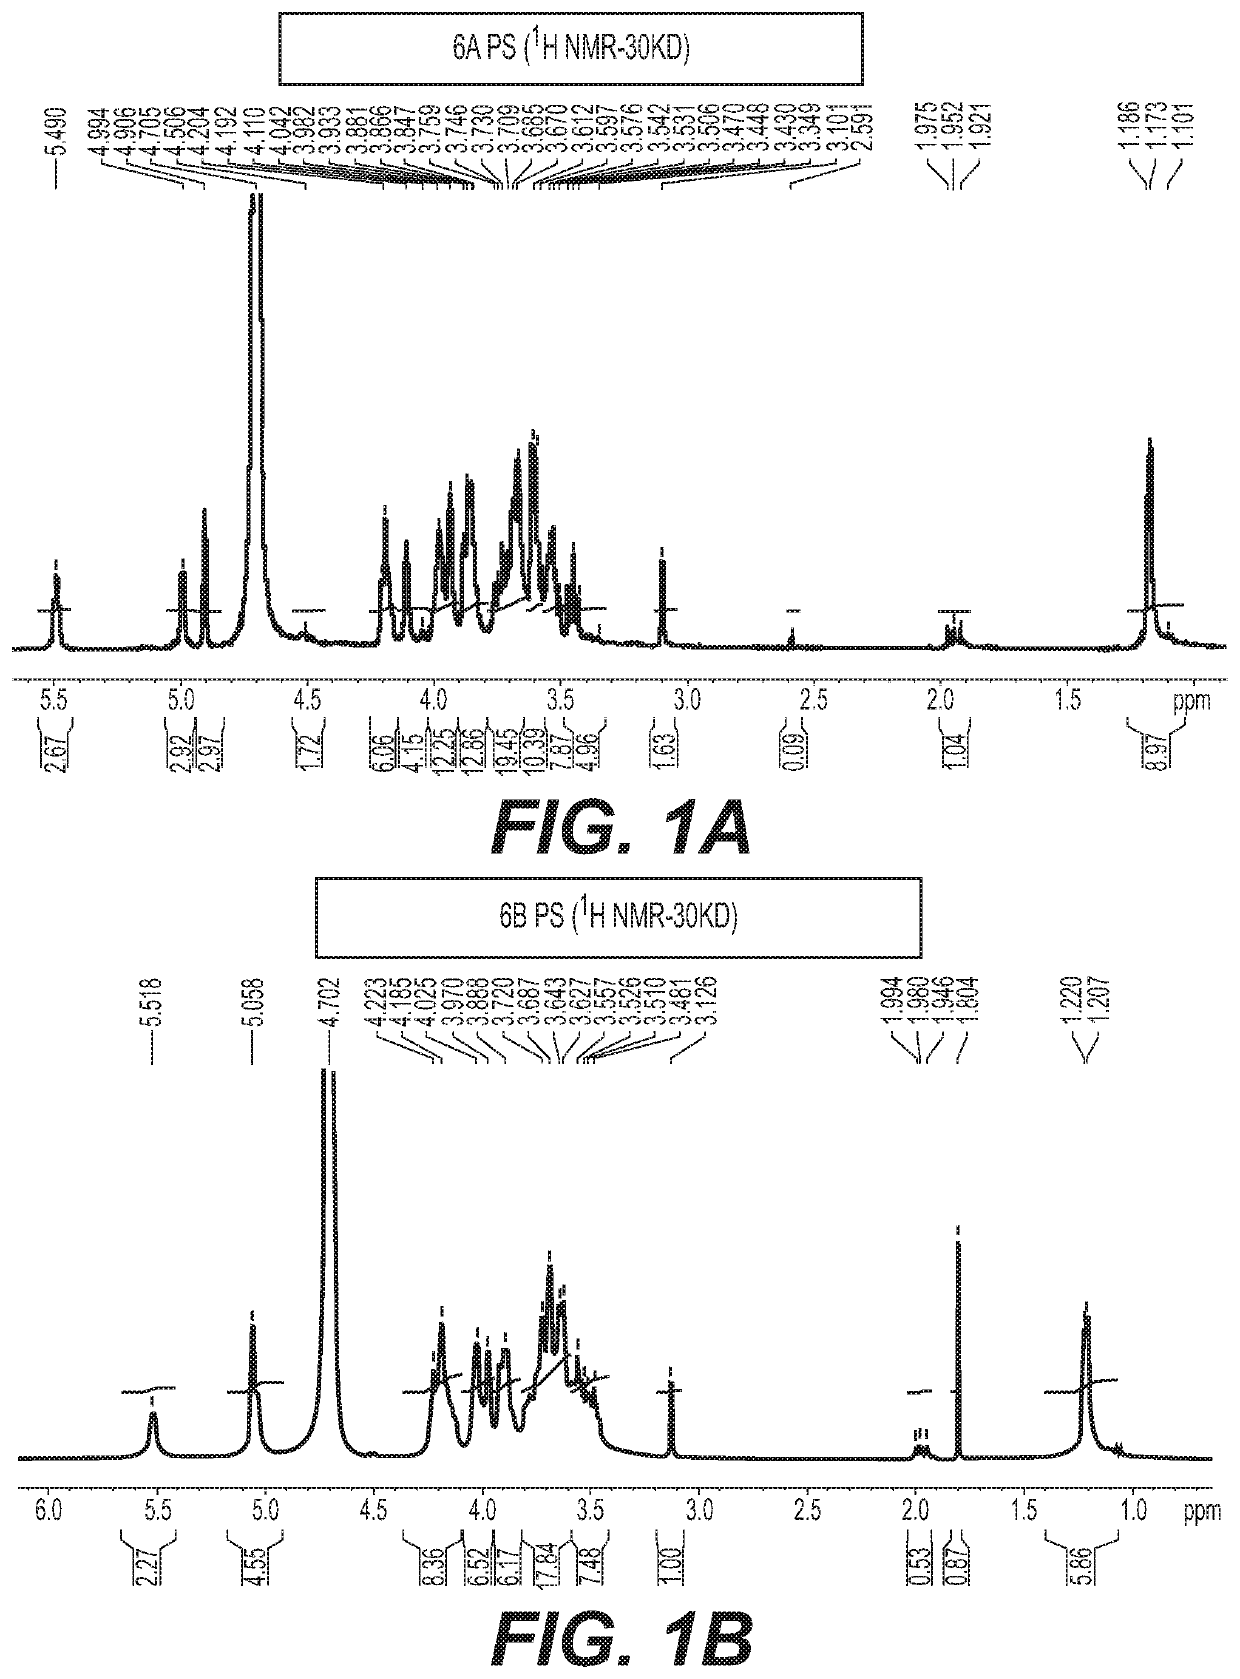 Multivalent conjugate vaccines with bivalent or multivalent conjugate polysaccharides that provide improved immunogenicity and avidity